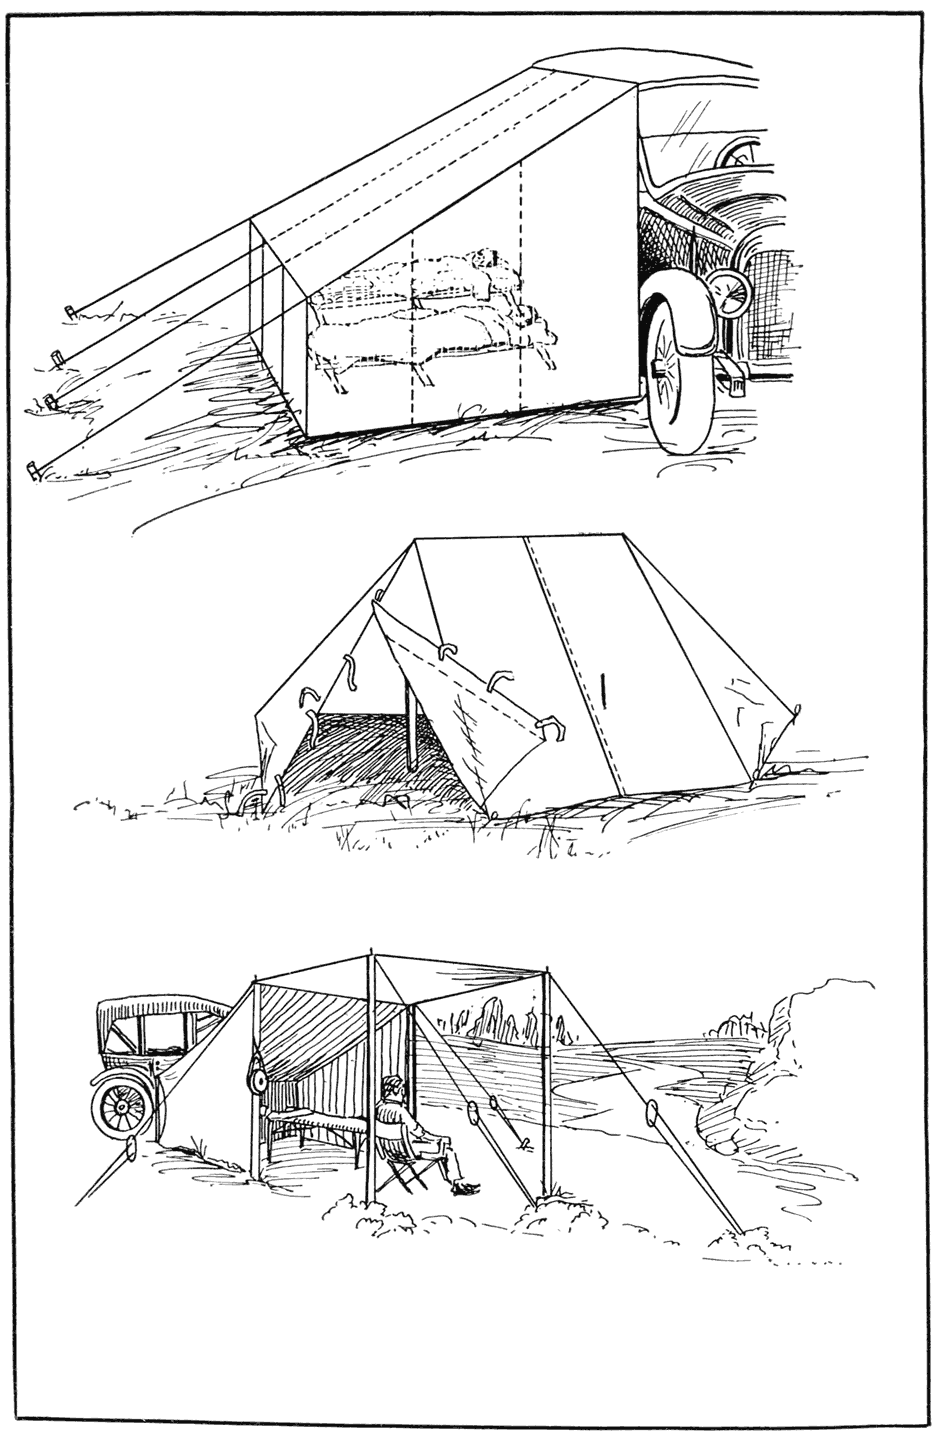 Above the Moto-Tent of the type attaching to the side of the
car. In the middle, the simple Scouts Featherweight
Tent. At the bottom a light serviceable Outdoor Week-End
Tent